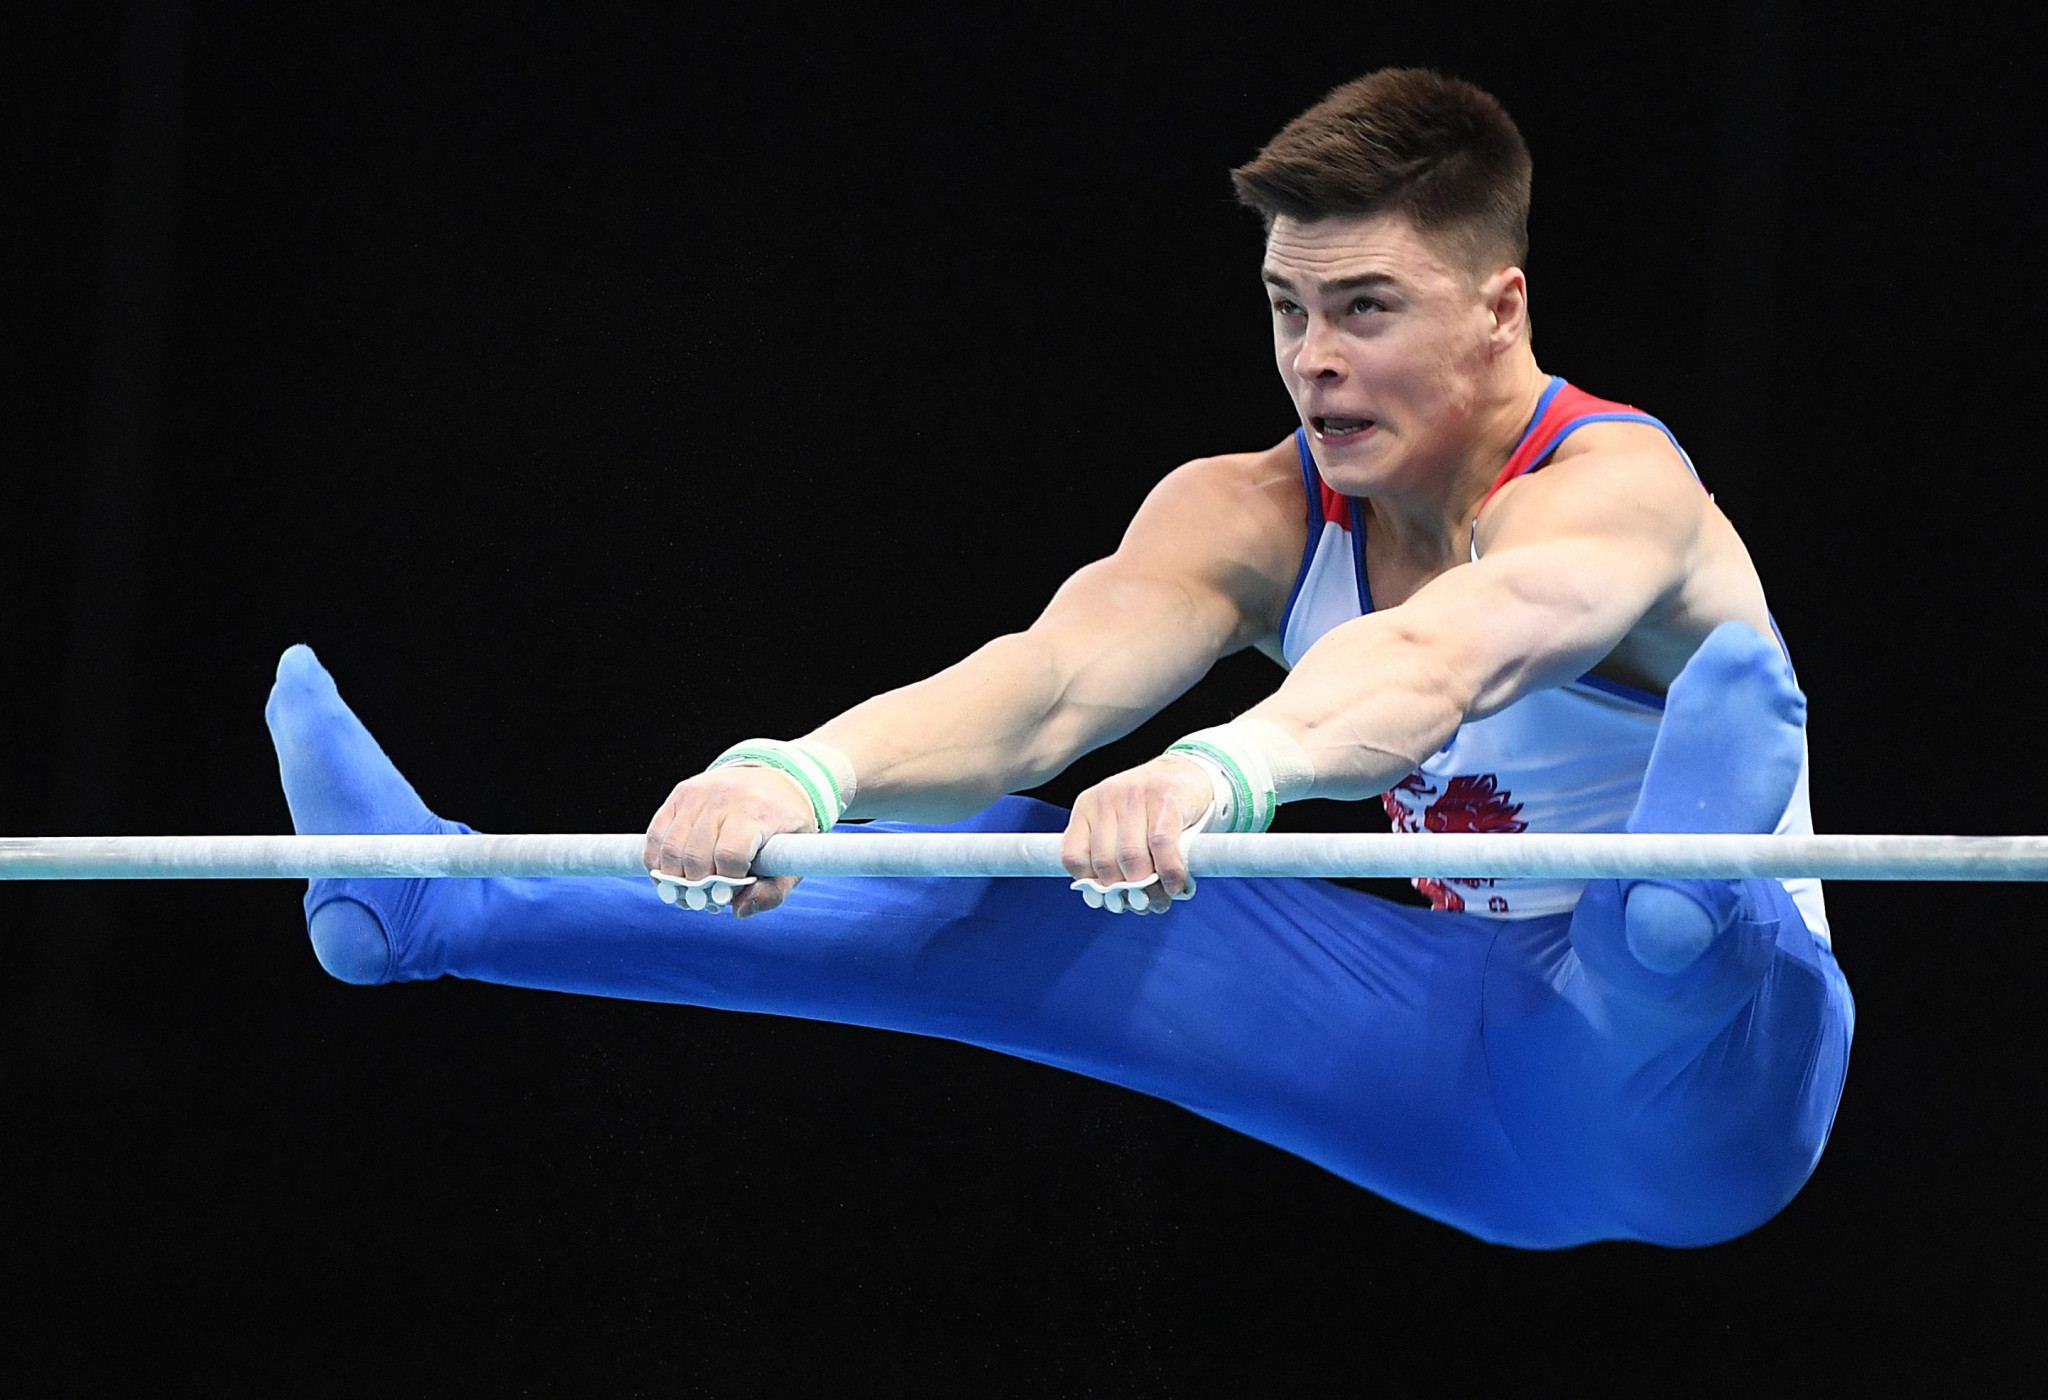 Nagornyy takes first all-around title at European Artistic Gymnastics Individual Championships